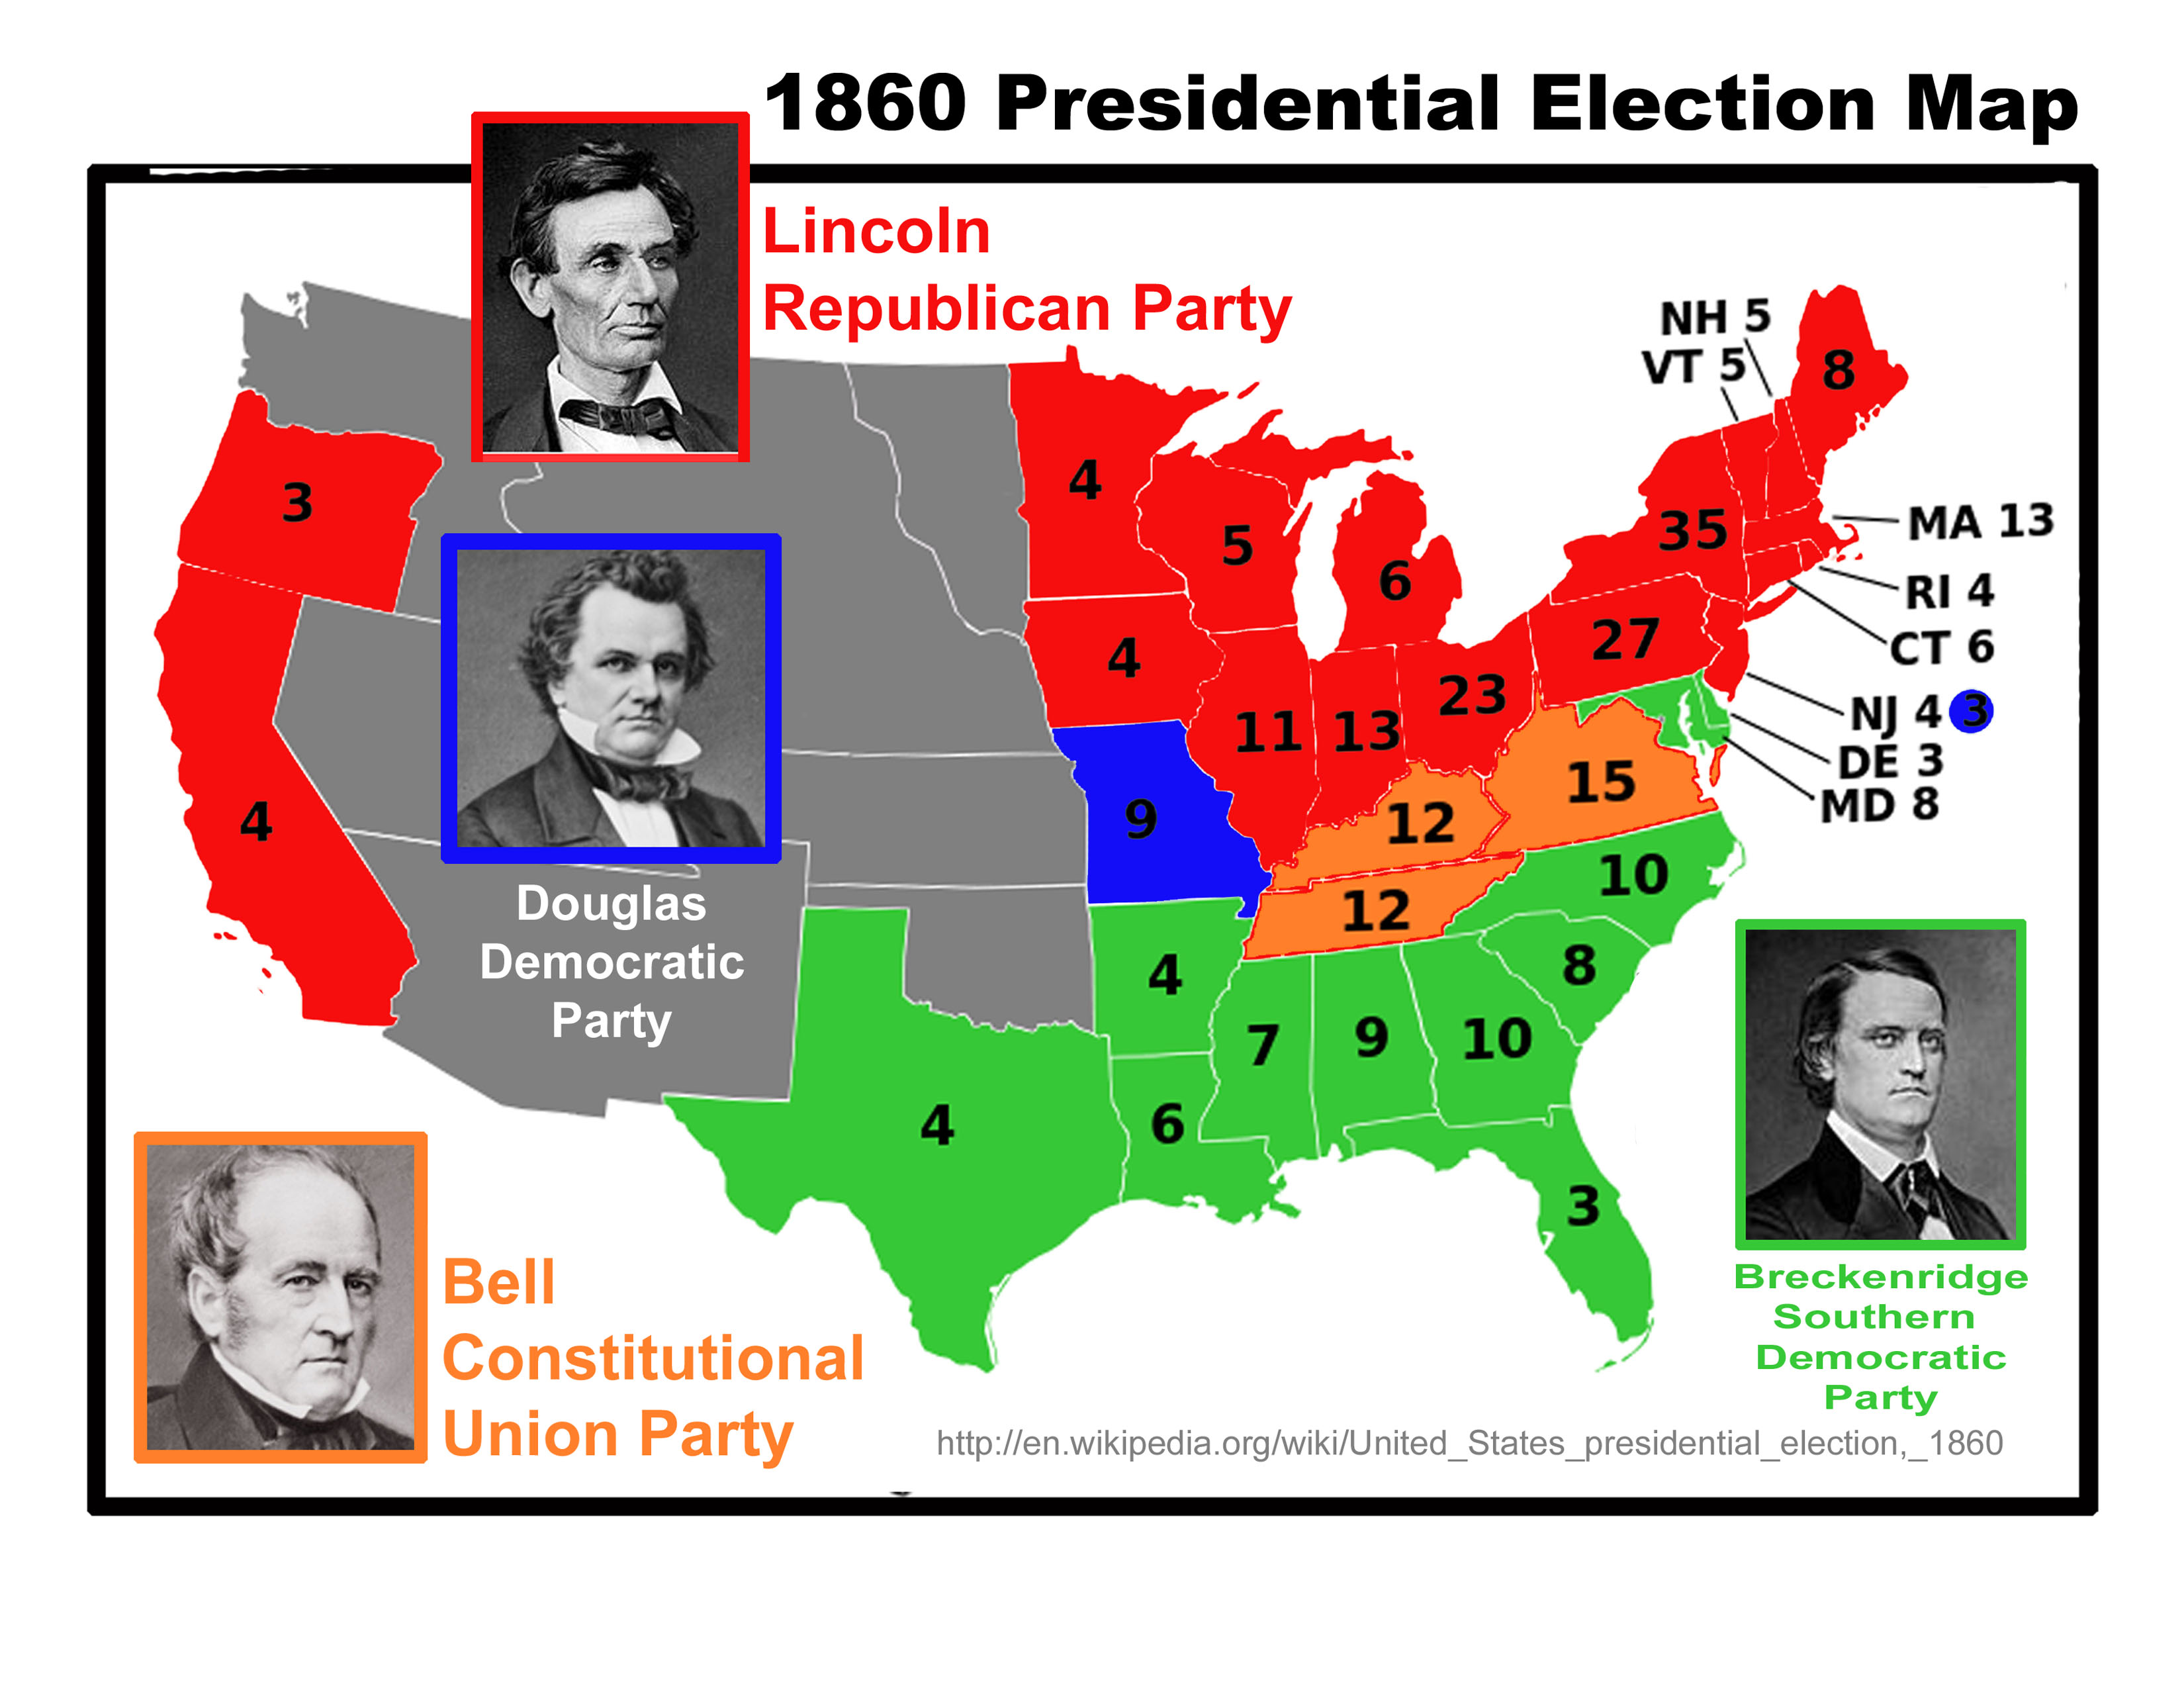 1860-presidential-election-map_2nd_image.jpg